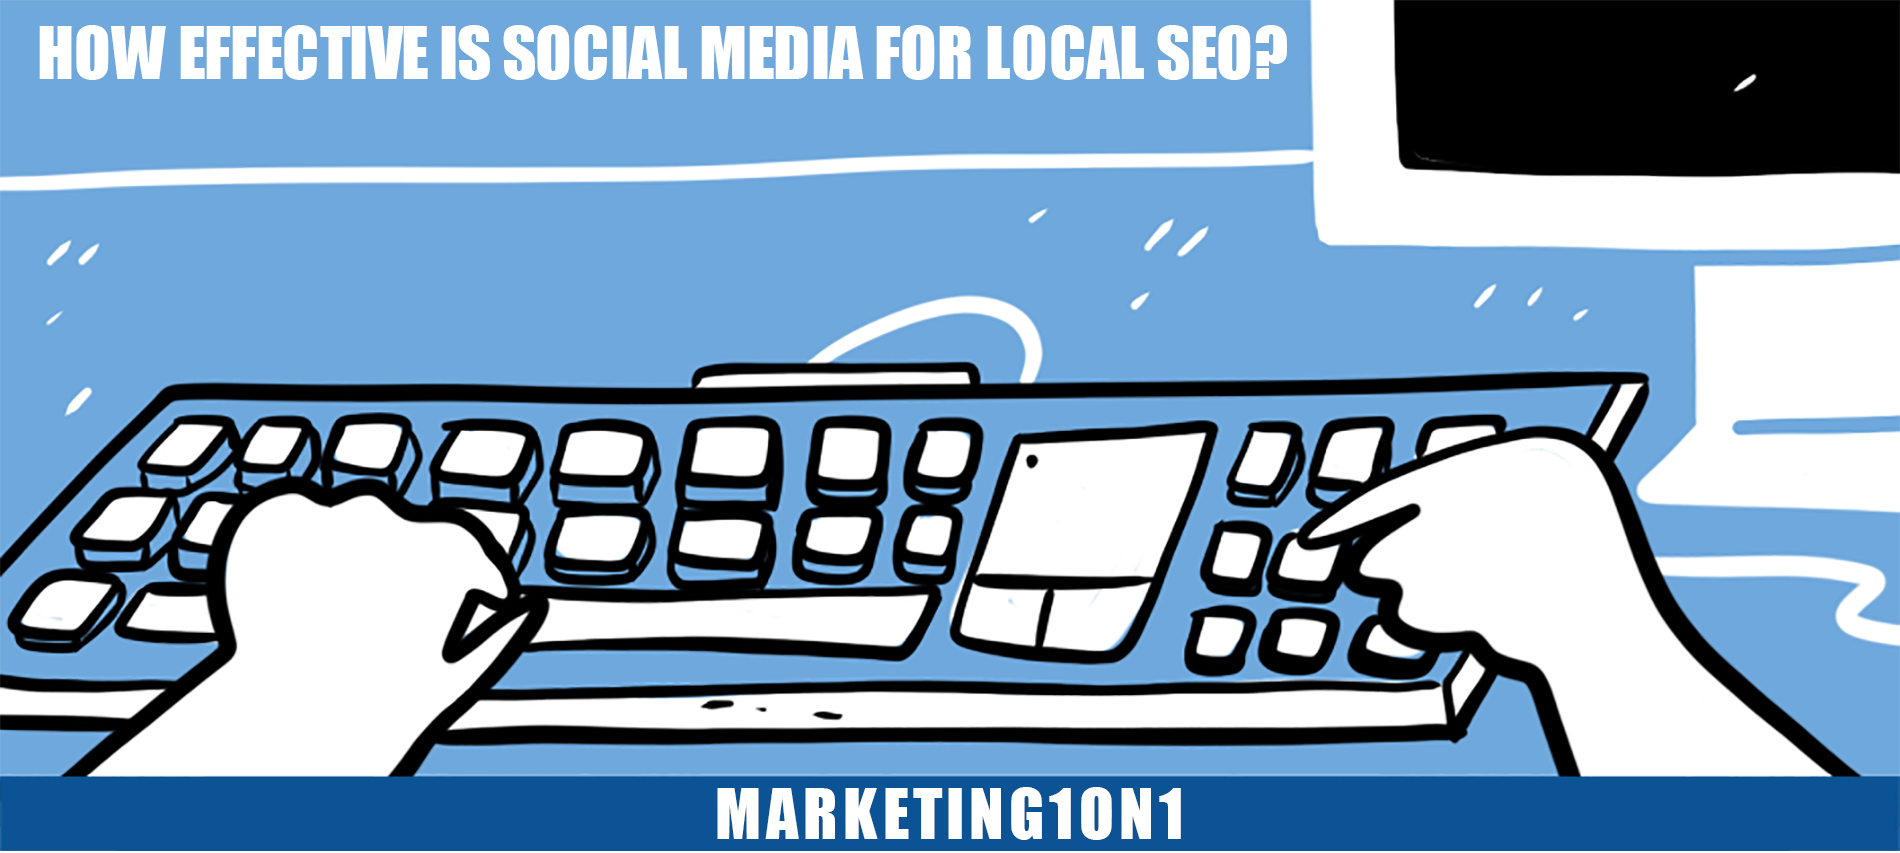 How effective is social media for local SEO?